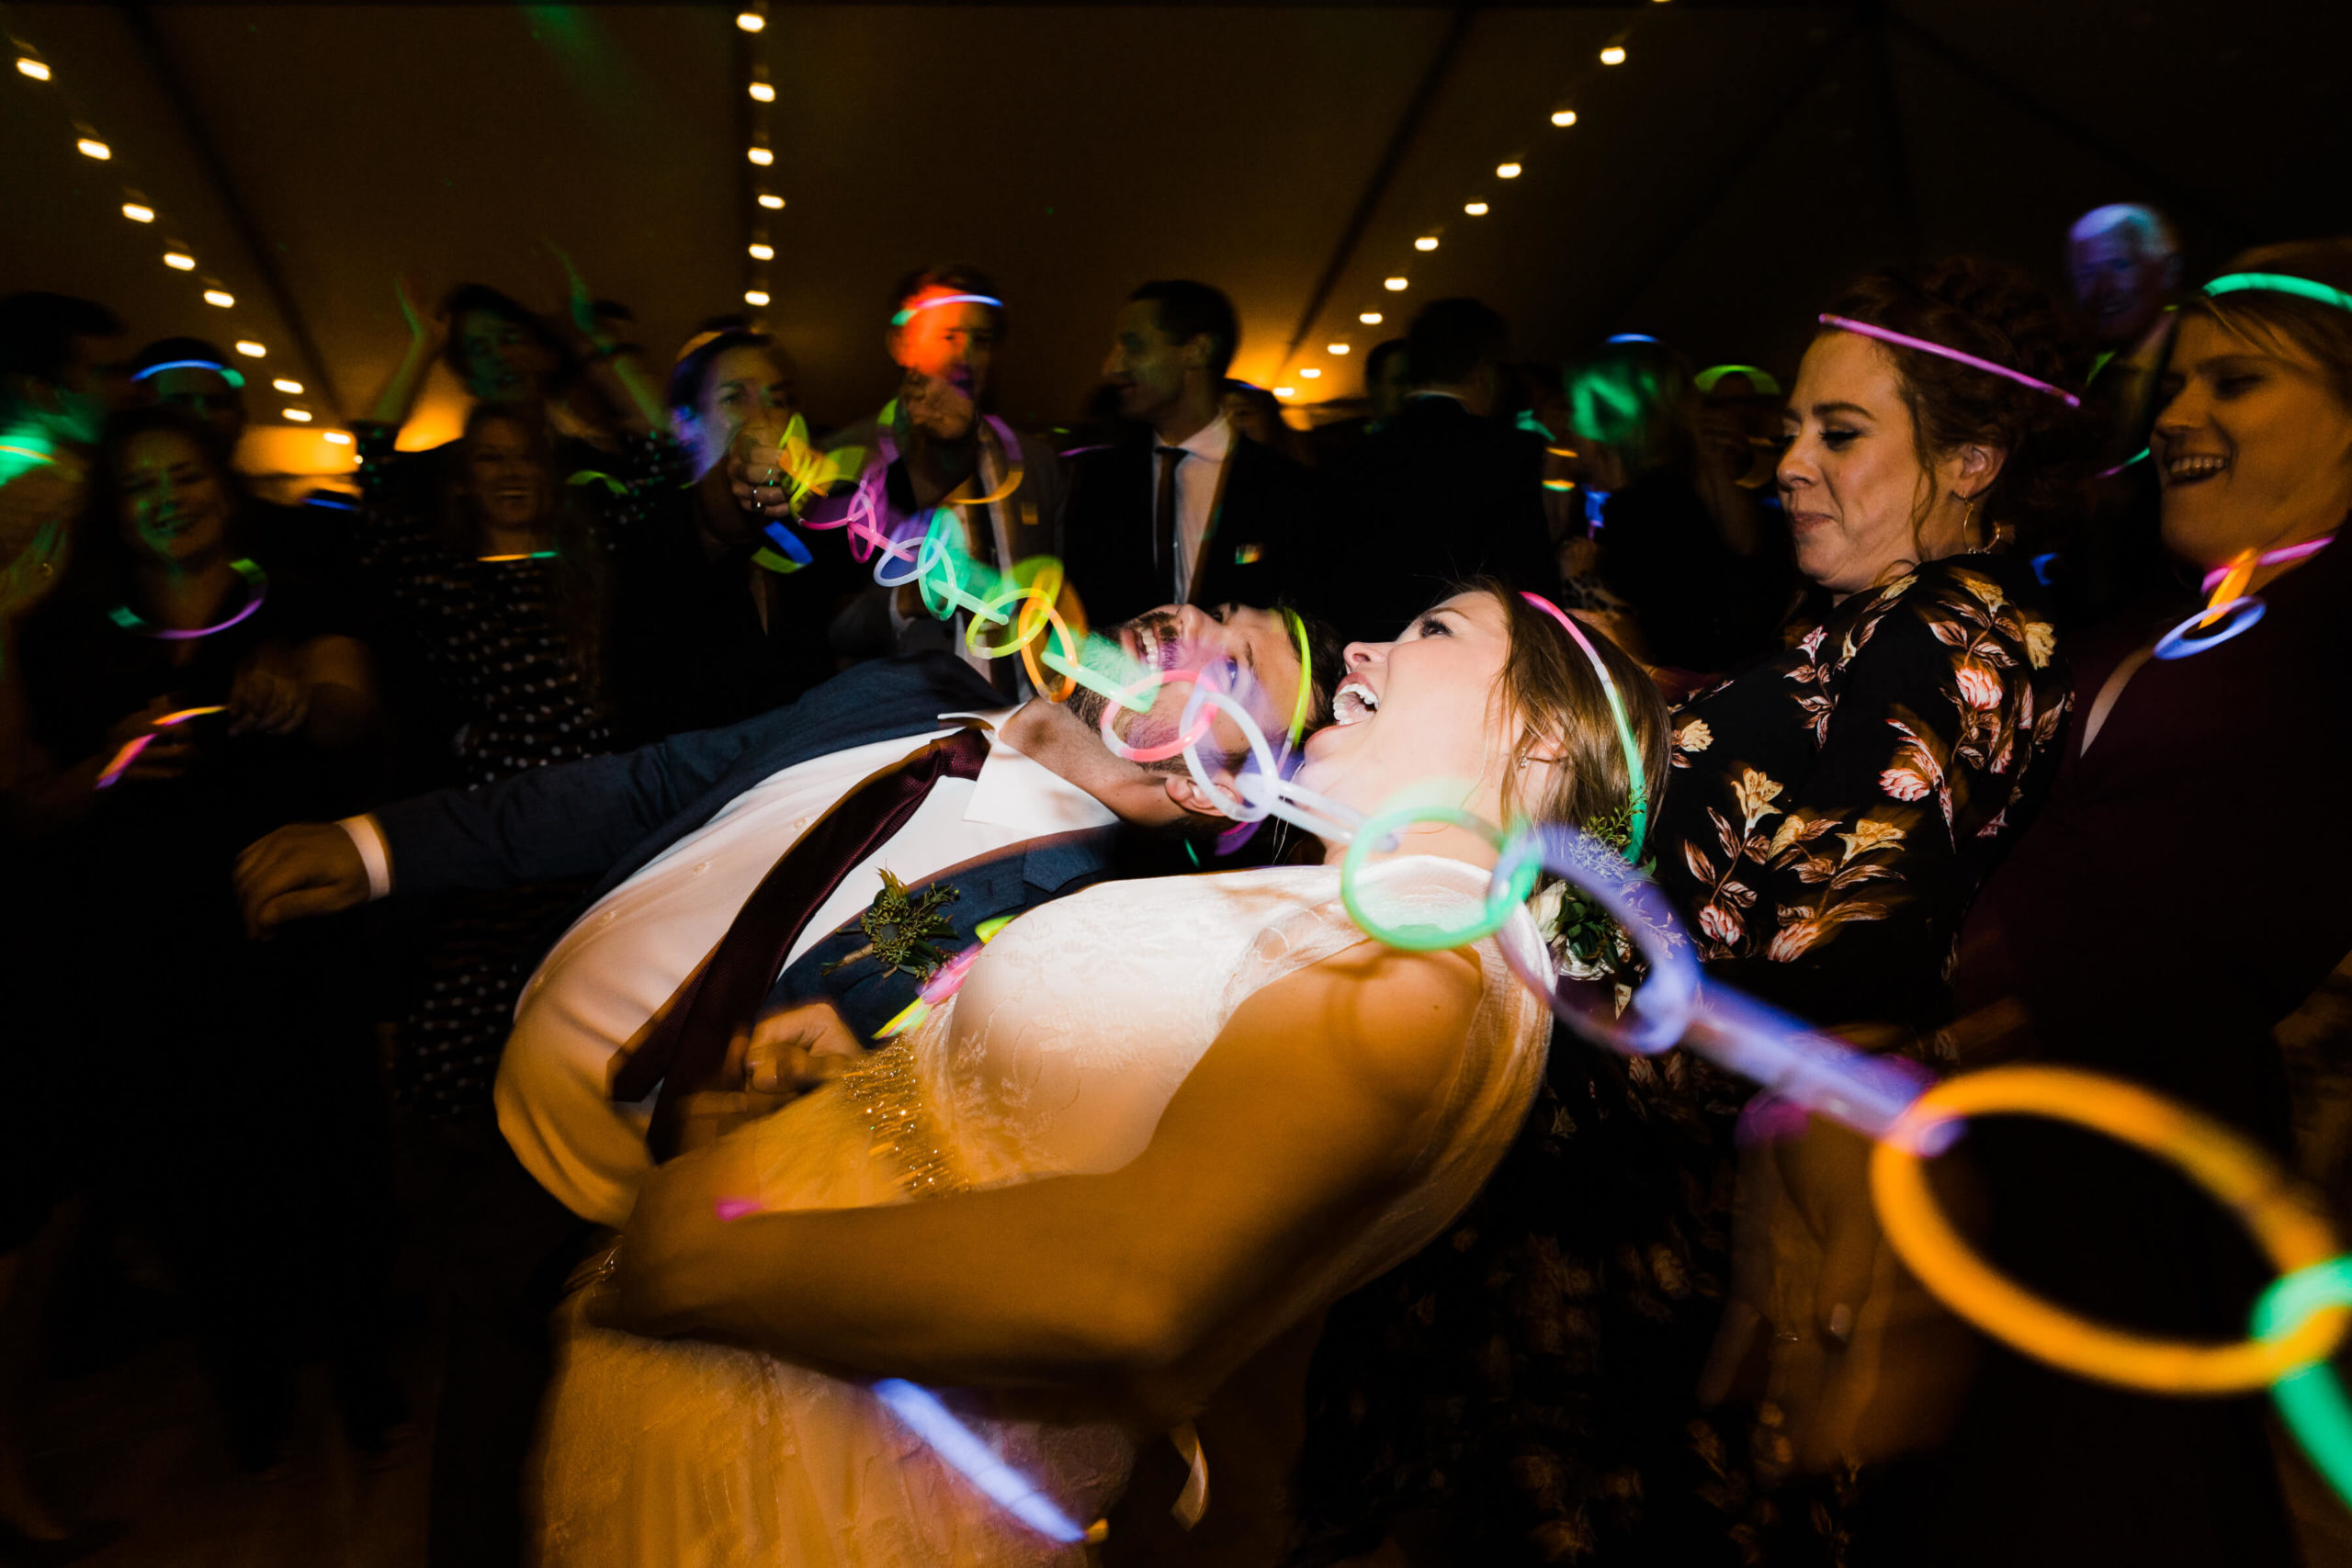 Bride and groom dancing with neon lights at backyard wedding reception